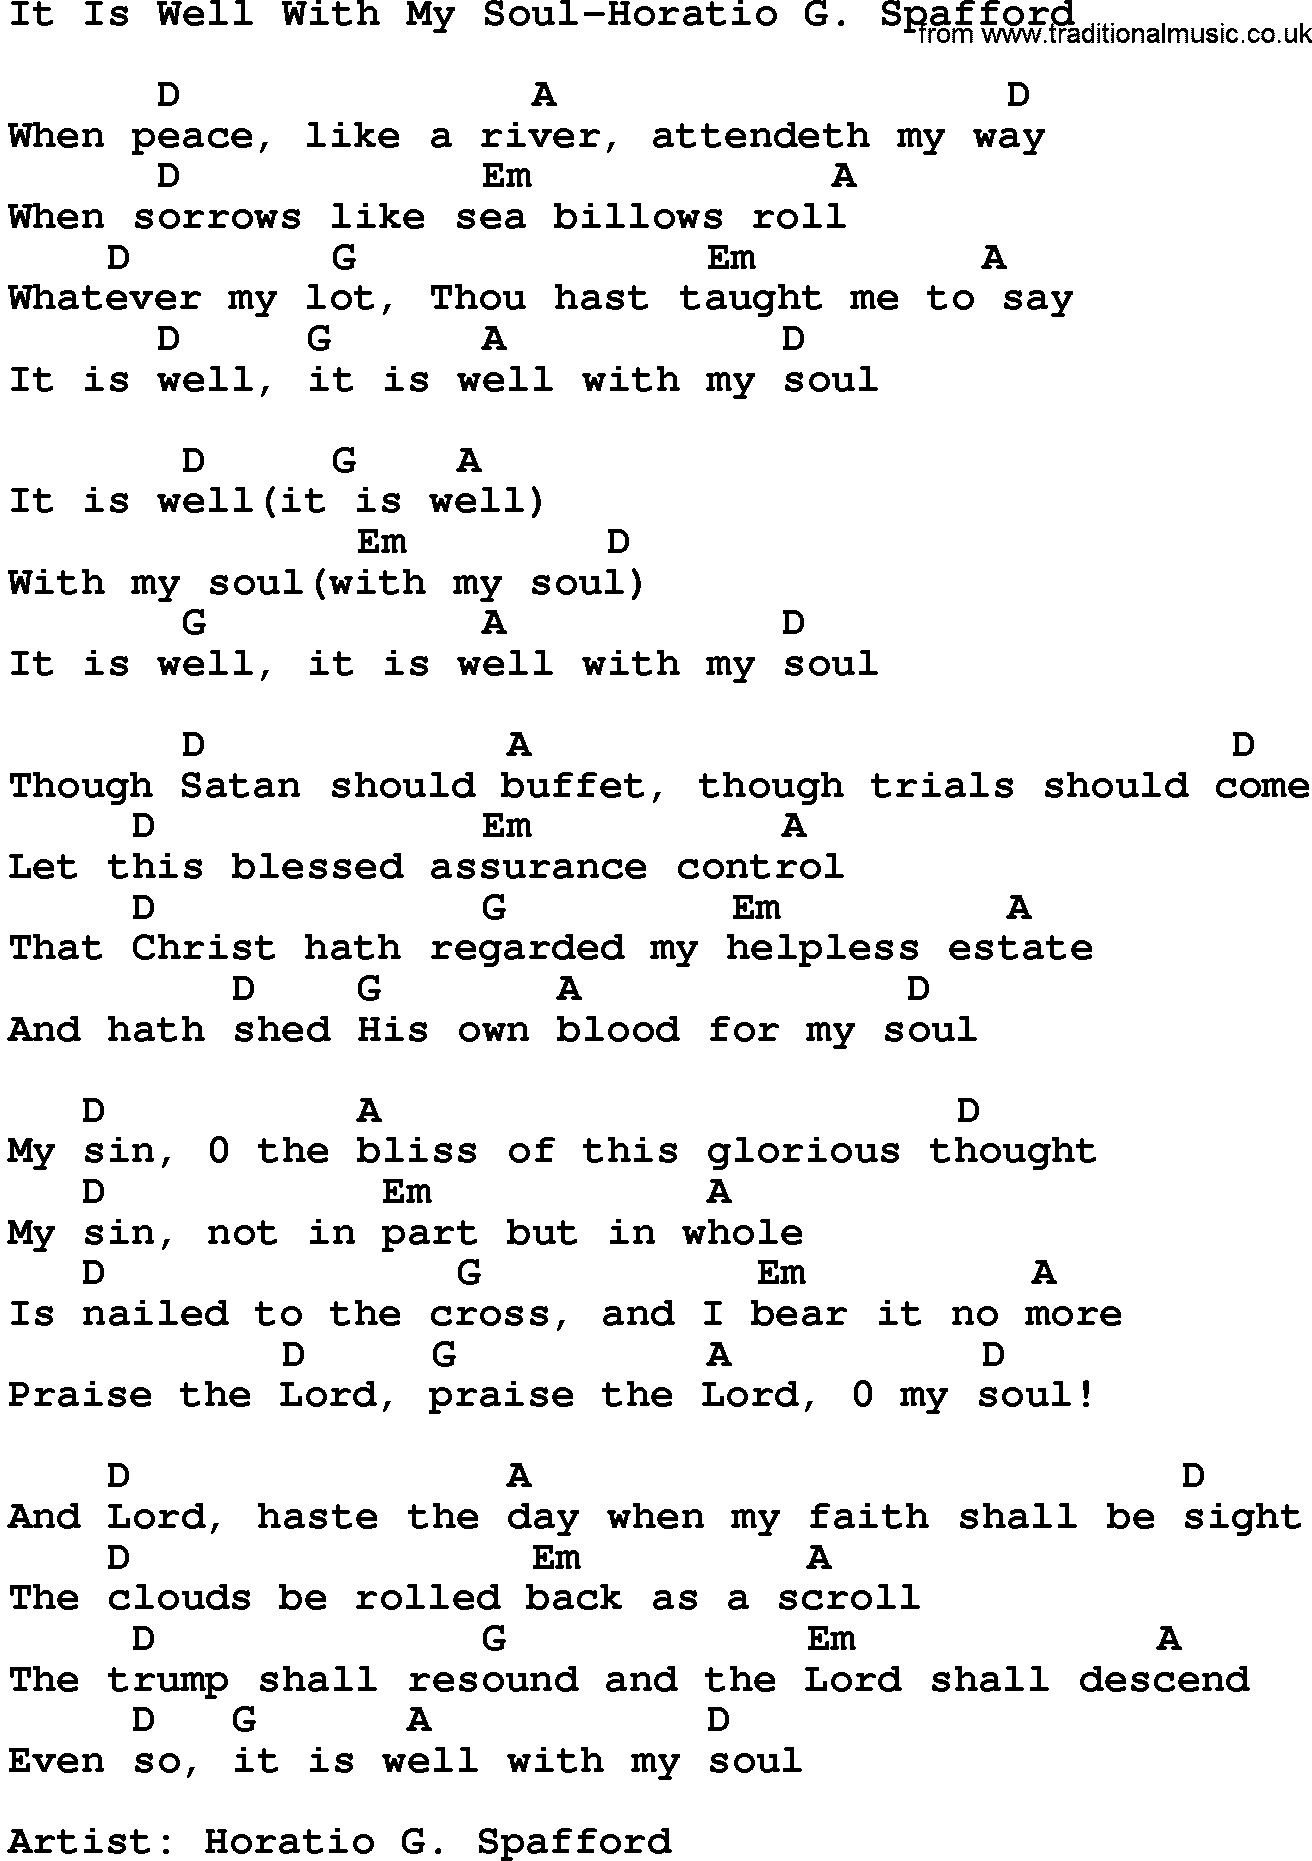 It Is Well Chords Gospel Song It Is Well With My Soul Horatio G Spafford Lyrics And